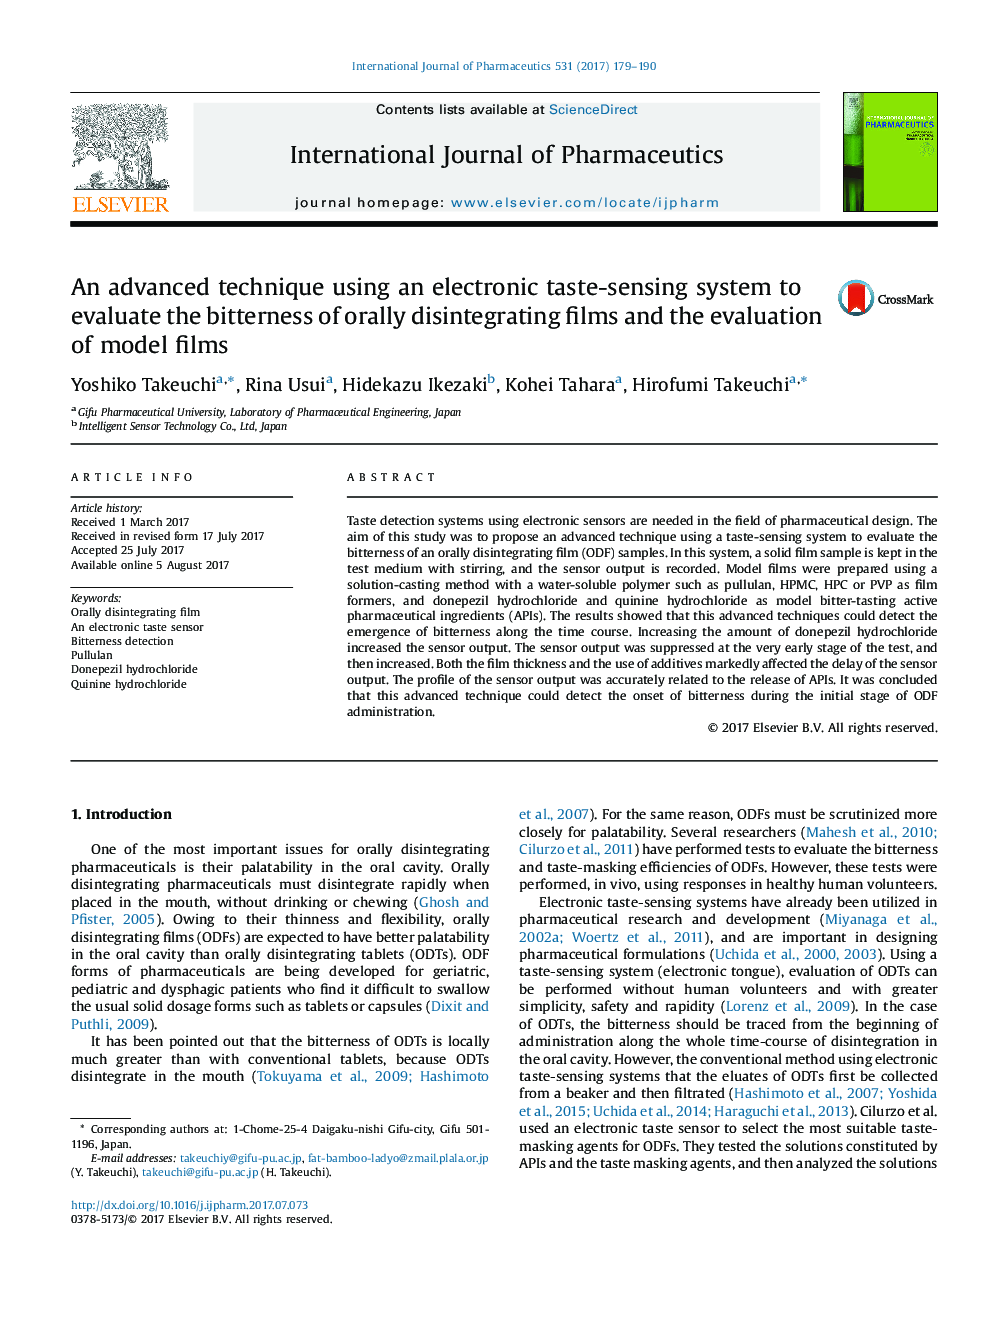 An advanced technique using an electronic taste-sensing system to evaluate the bitterness of orally disintegrating films and the evaluation of model films